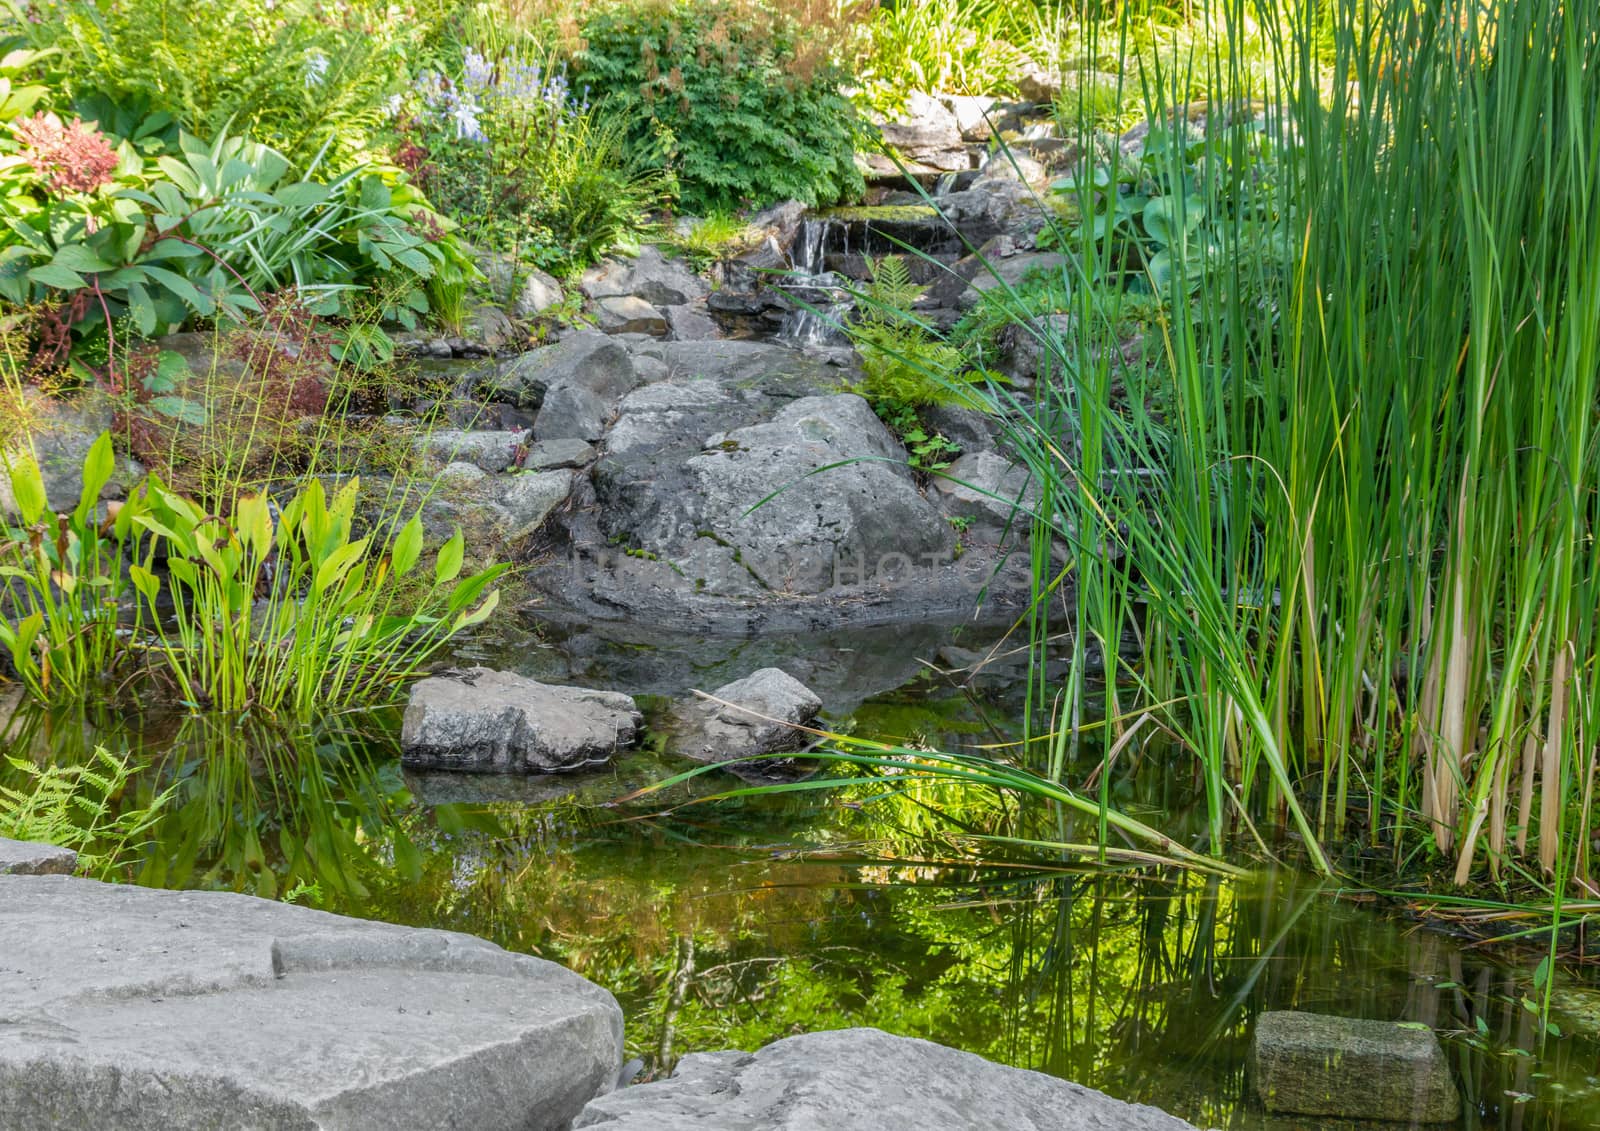 Detail of a summer garden with aquatic plants, pond and decorative stones.